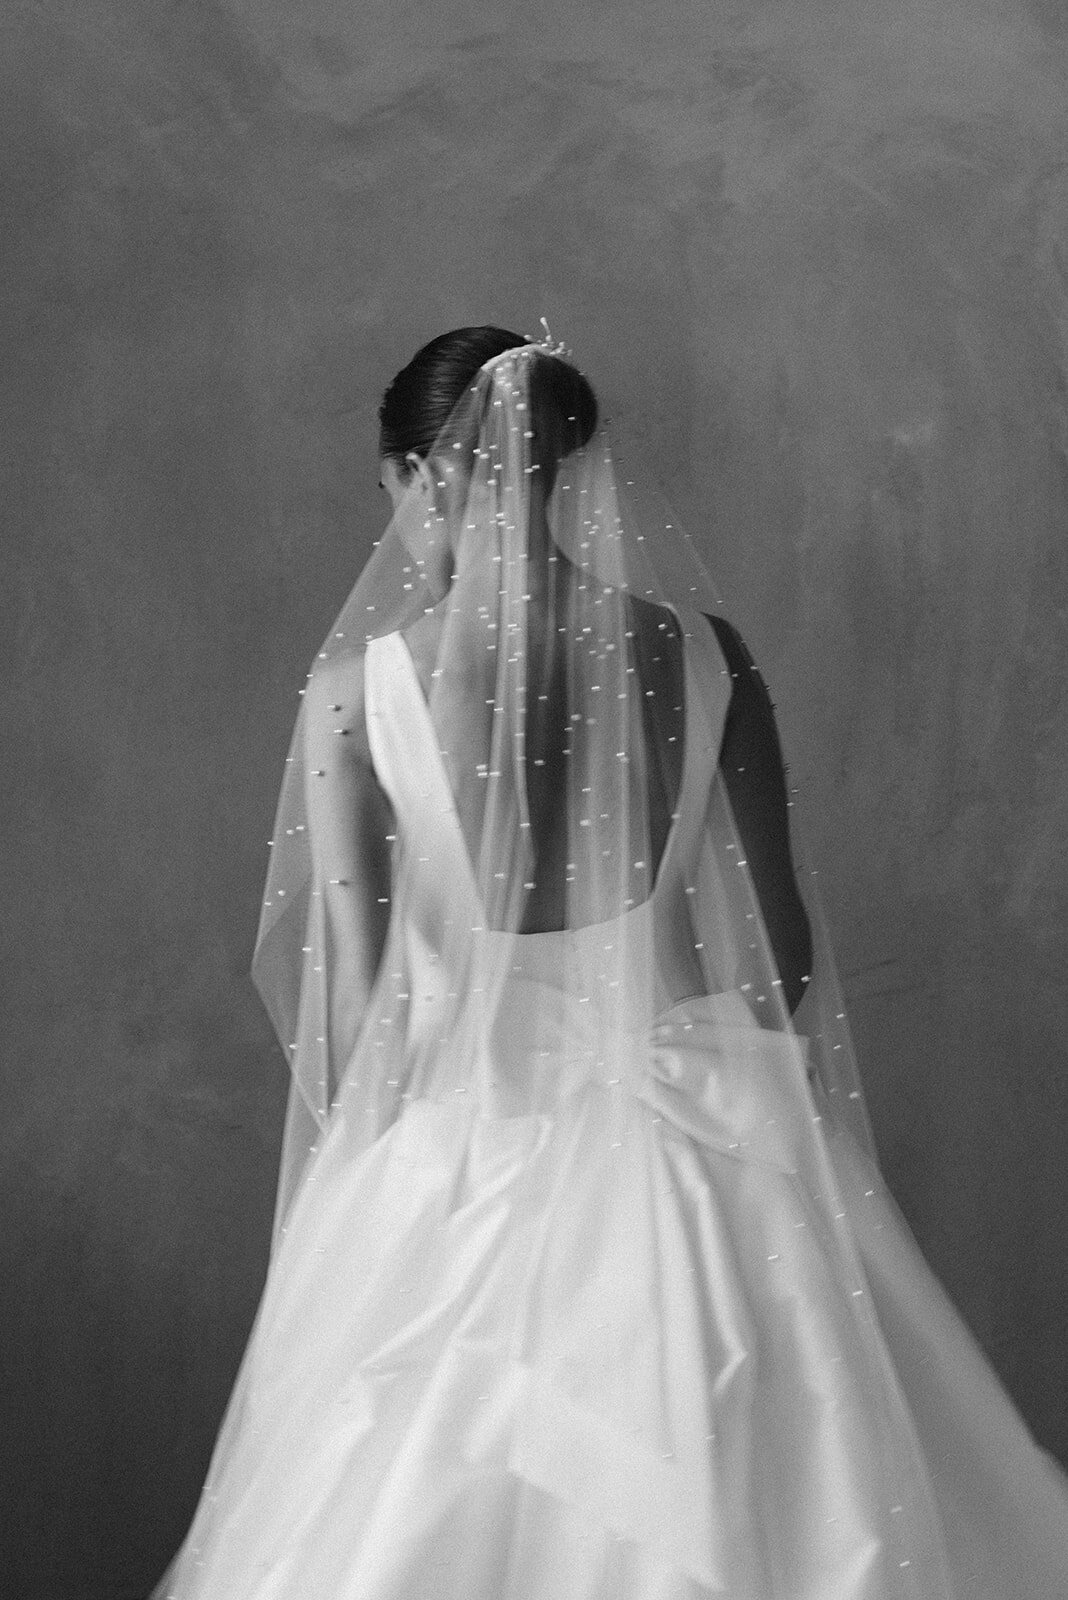 The bride posing with her amazing veil